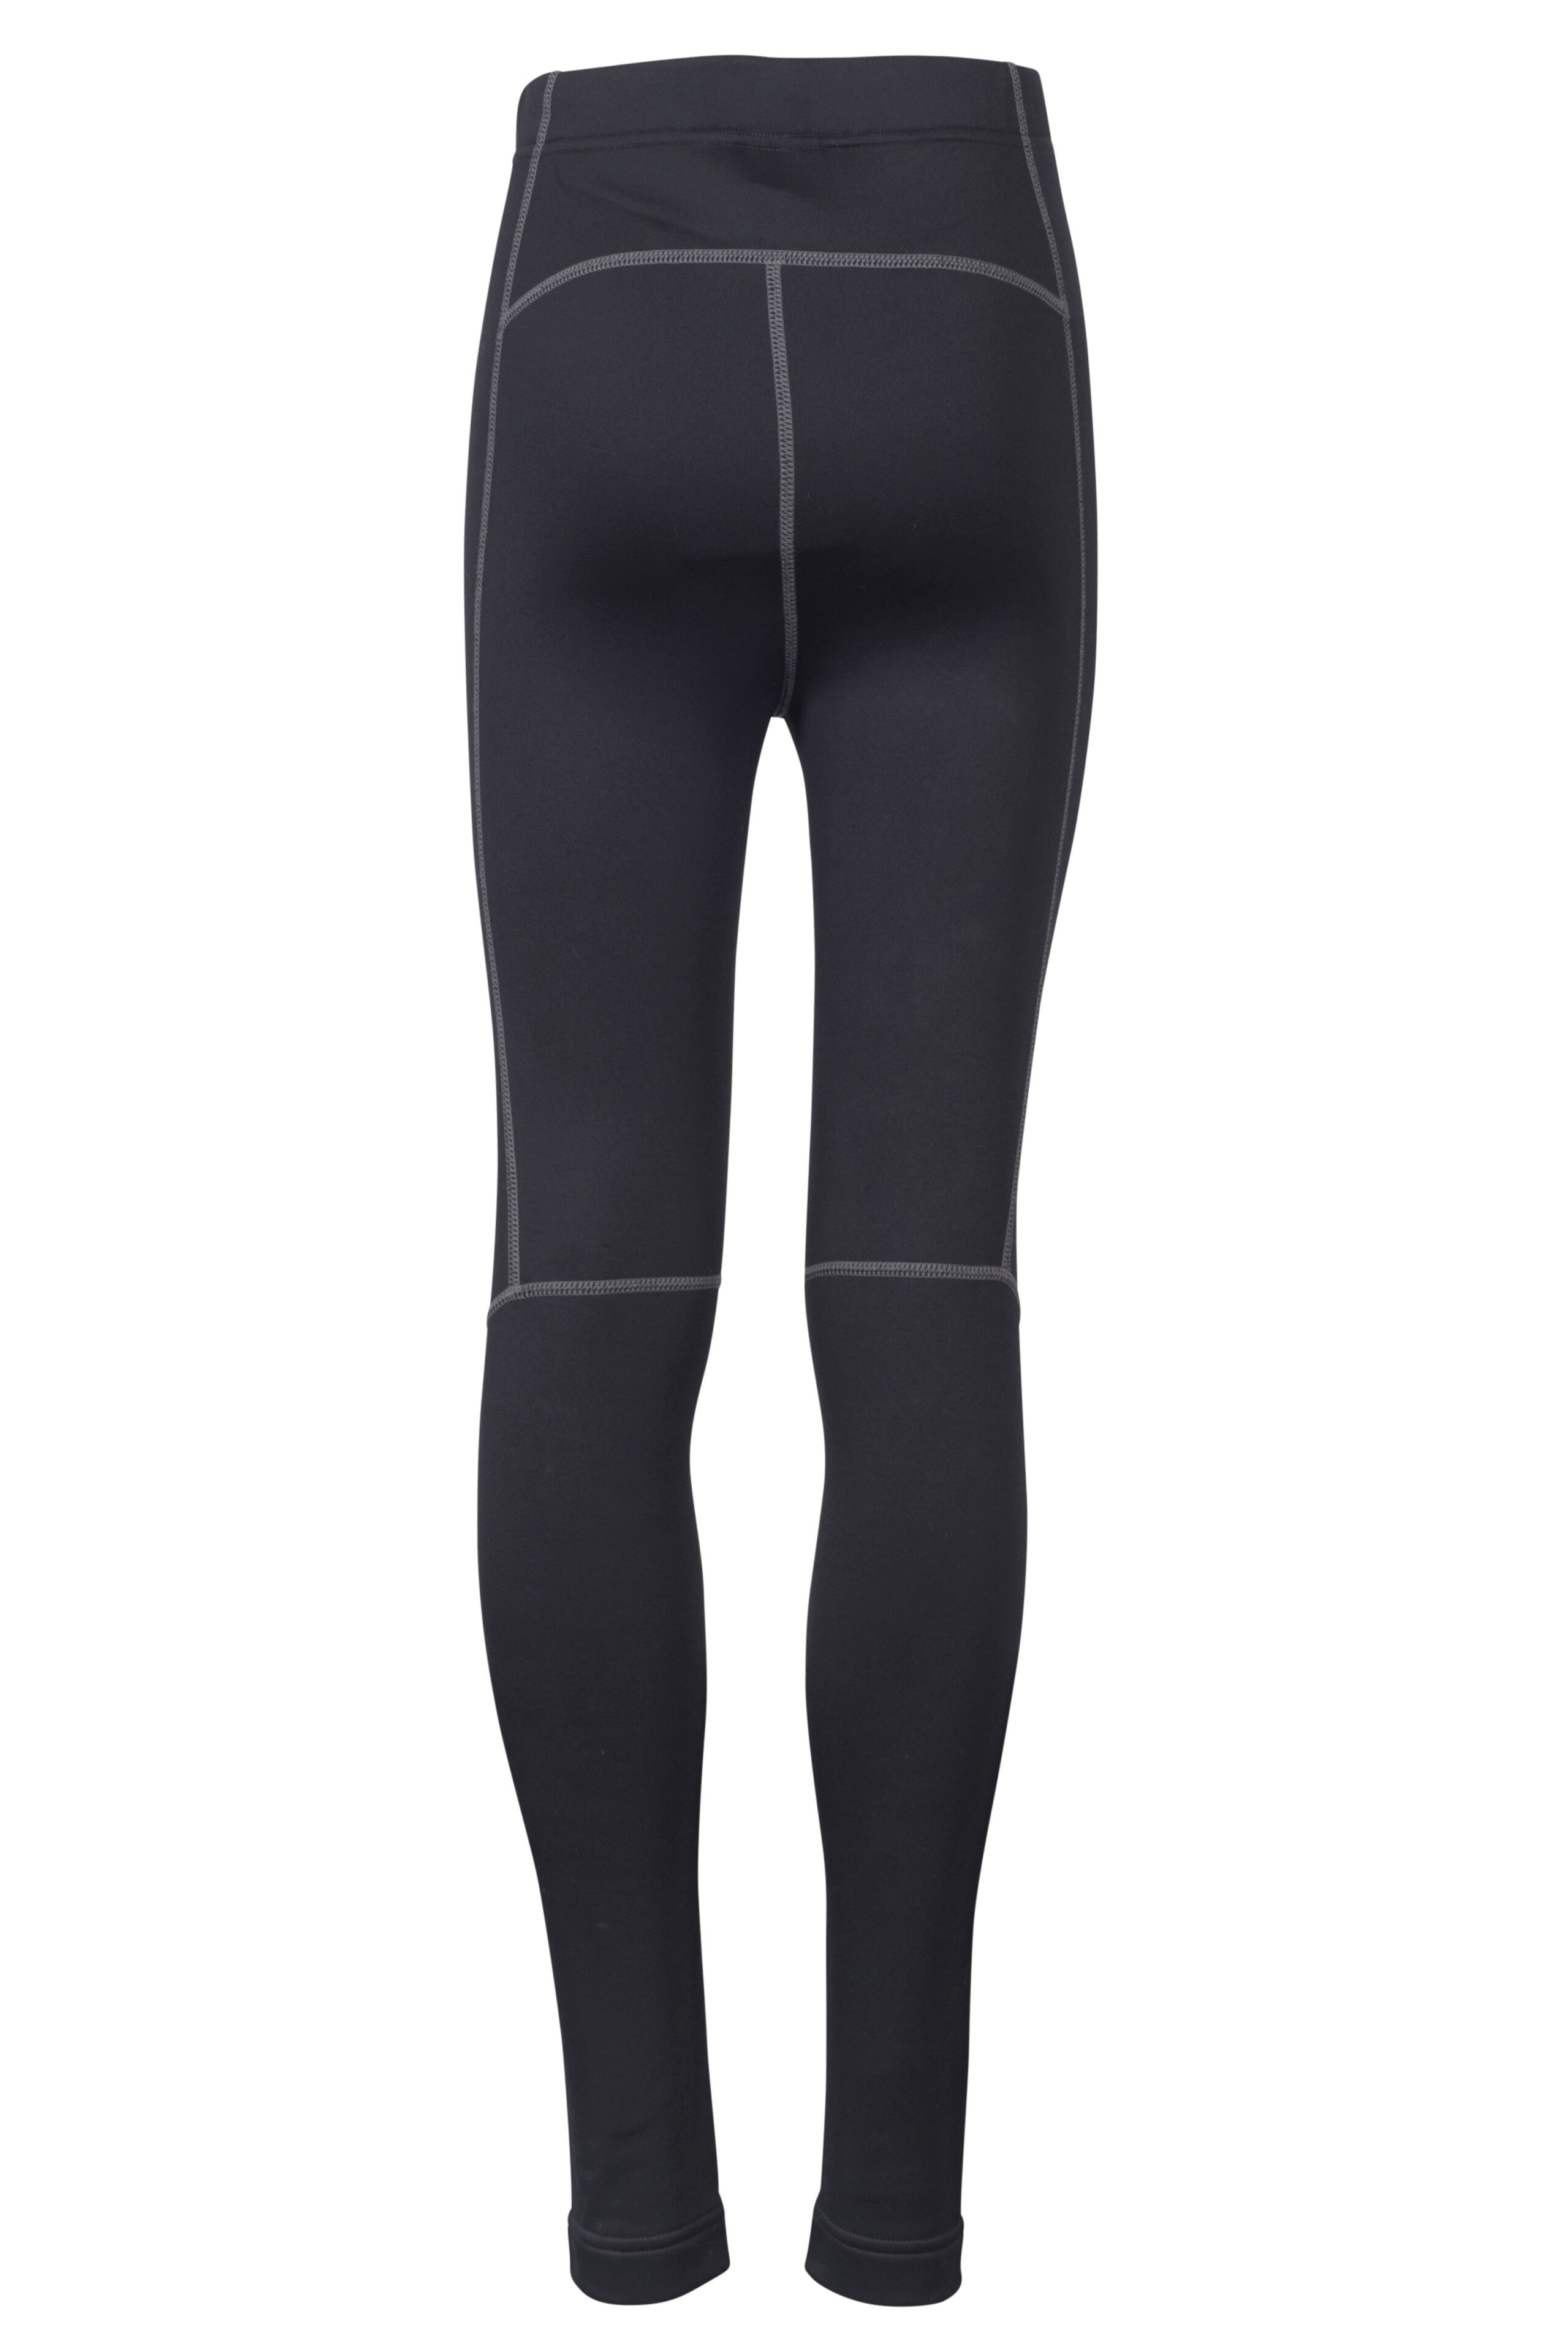 Plus Size Fleece Lined Leggings Nz | International Society of Precision  Agriculture